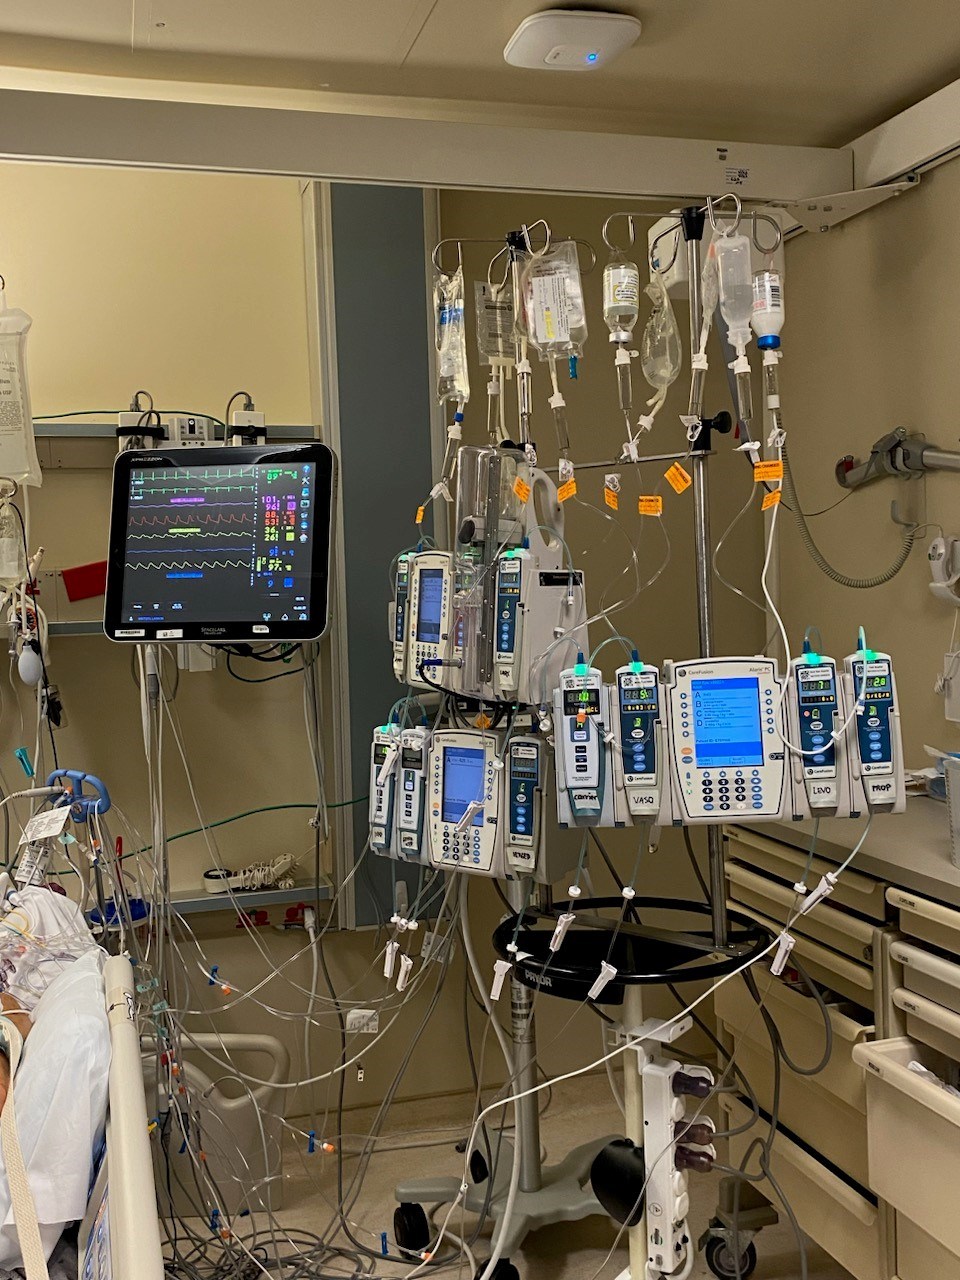 Intravenous bags and monitors were stacked up by Lanny Winters' bed while he was recovering from a devastating heart attack.